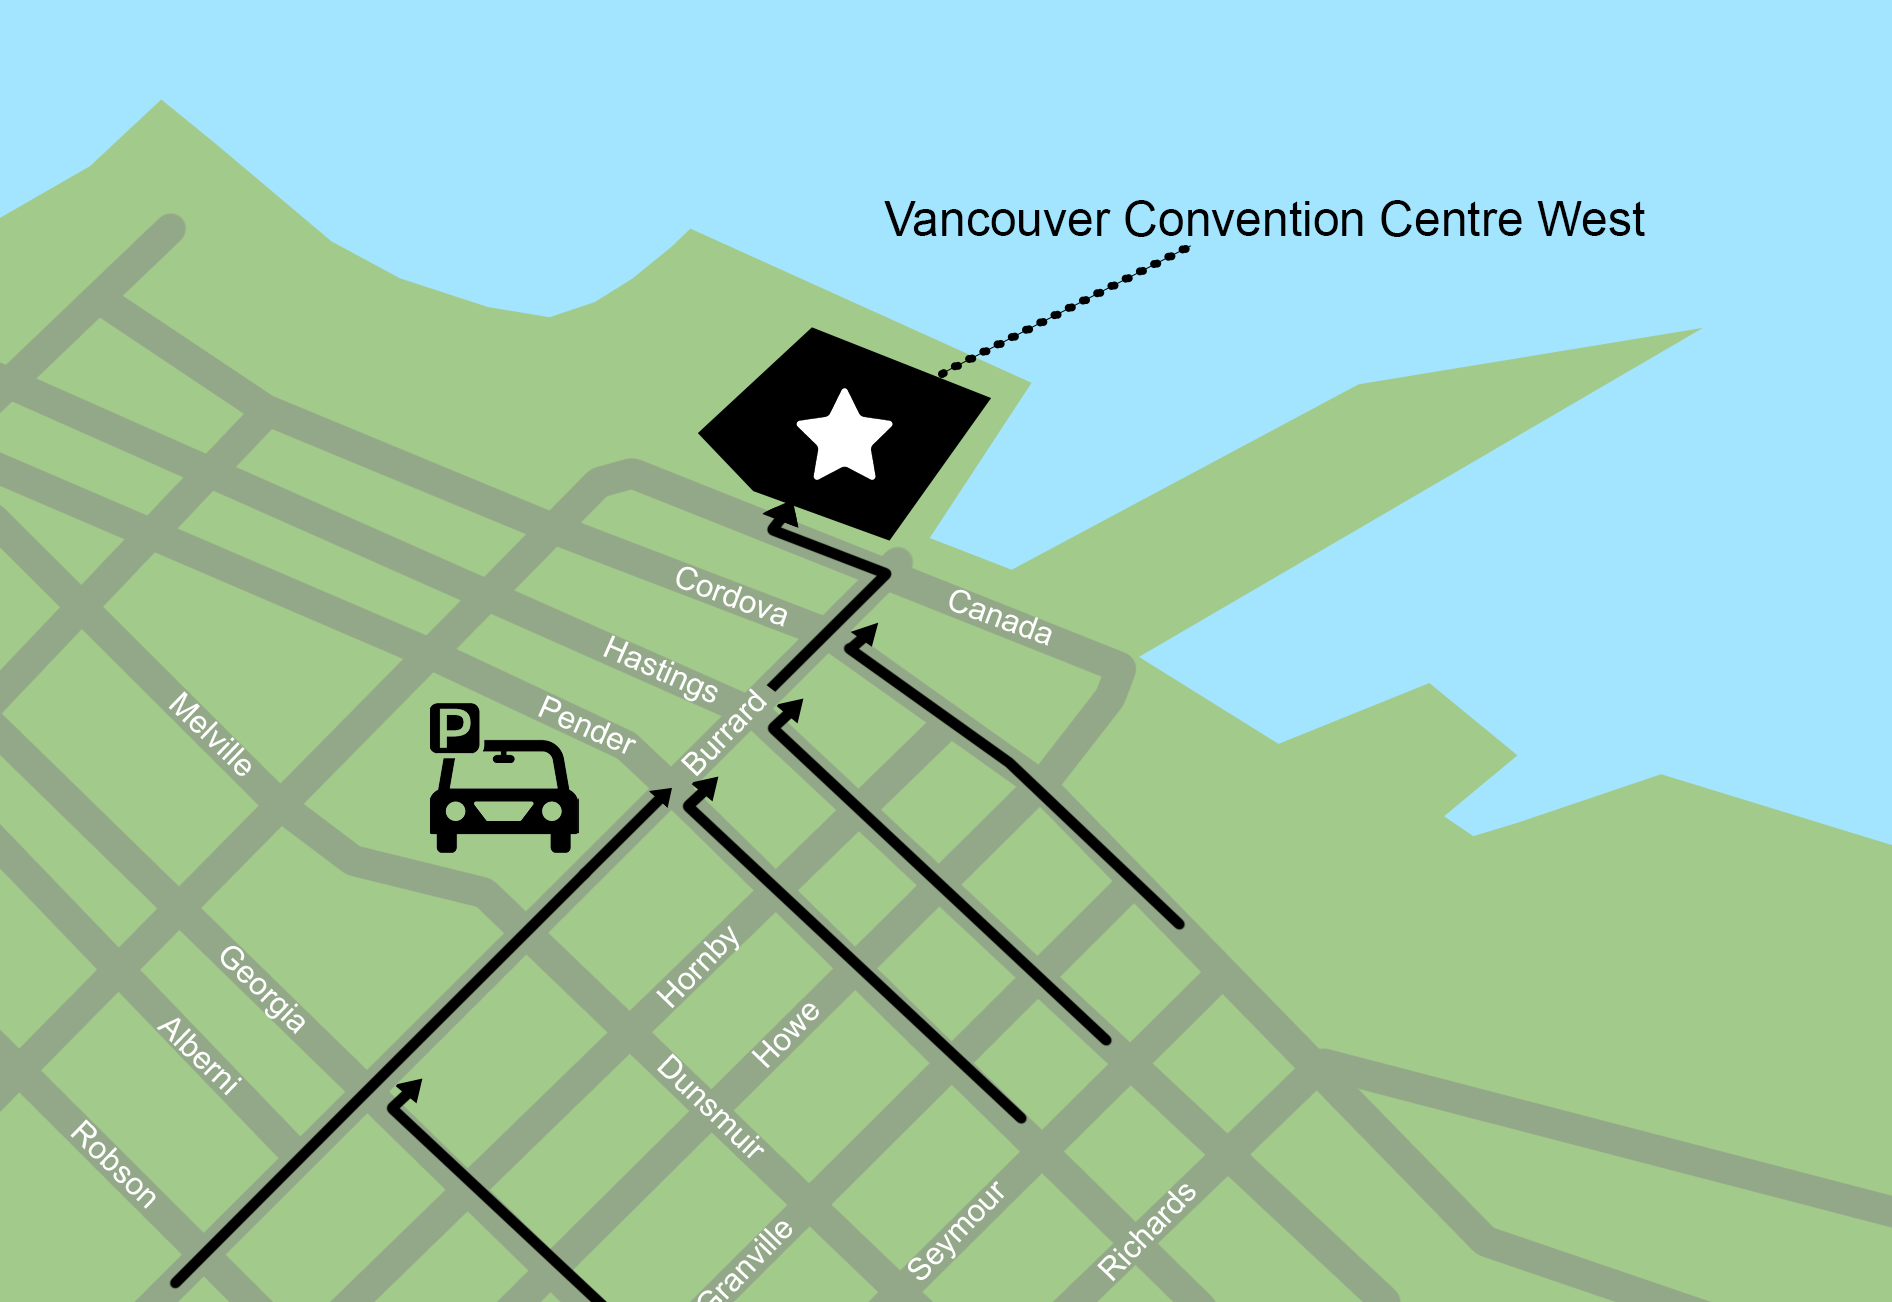 Map of parking suggestions to Vancouver Convention Centre West.